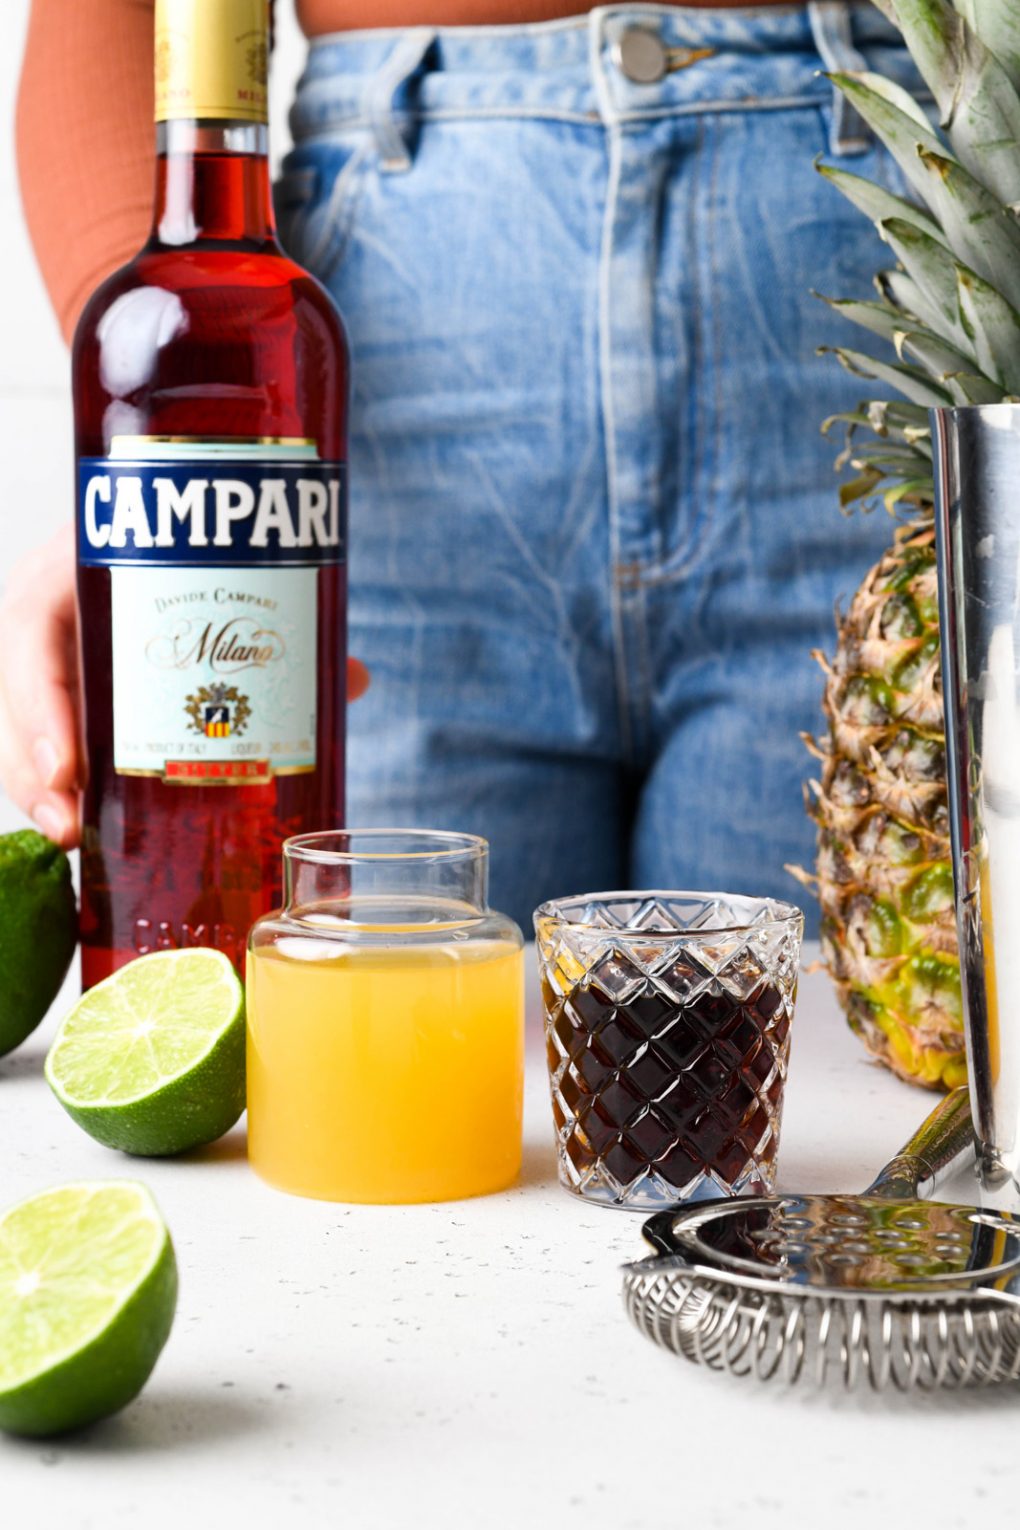 Straight on shot of the ingredients for a tropical jungle bird cocktail. A bottle of campari, a small jar of pineapple juice, a shot glass with dark rum, and some cut limes. On a white background.